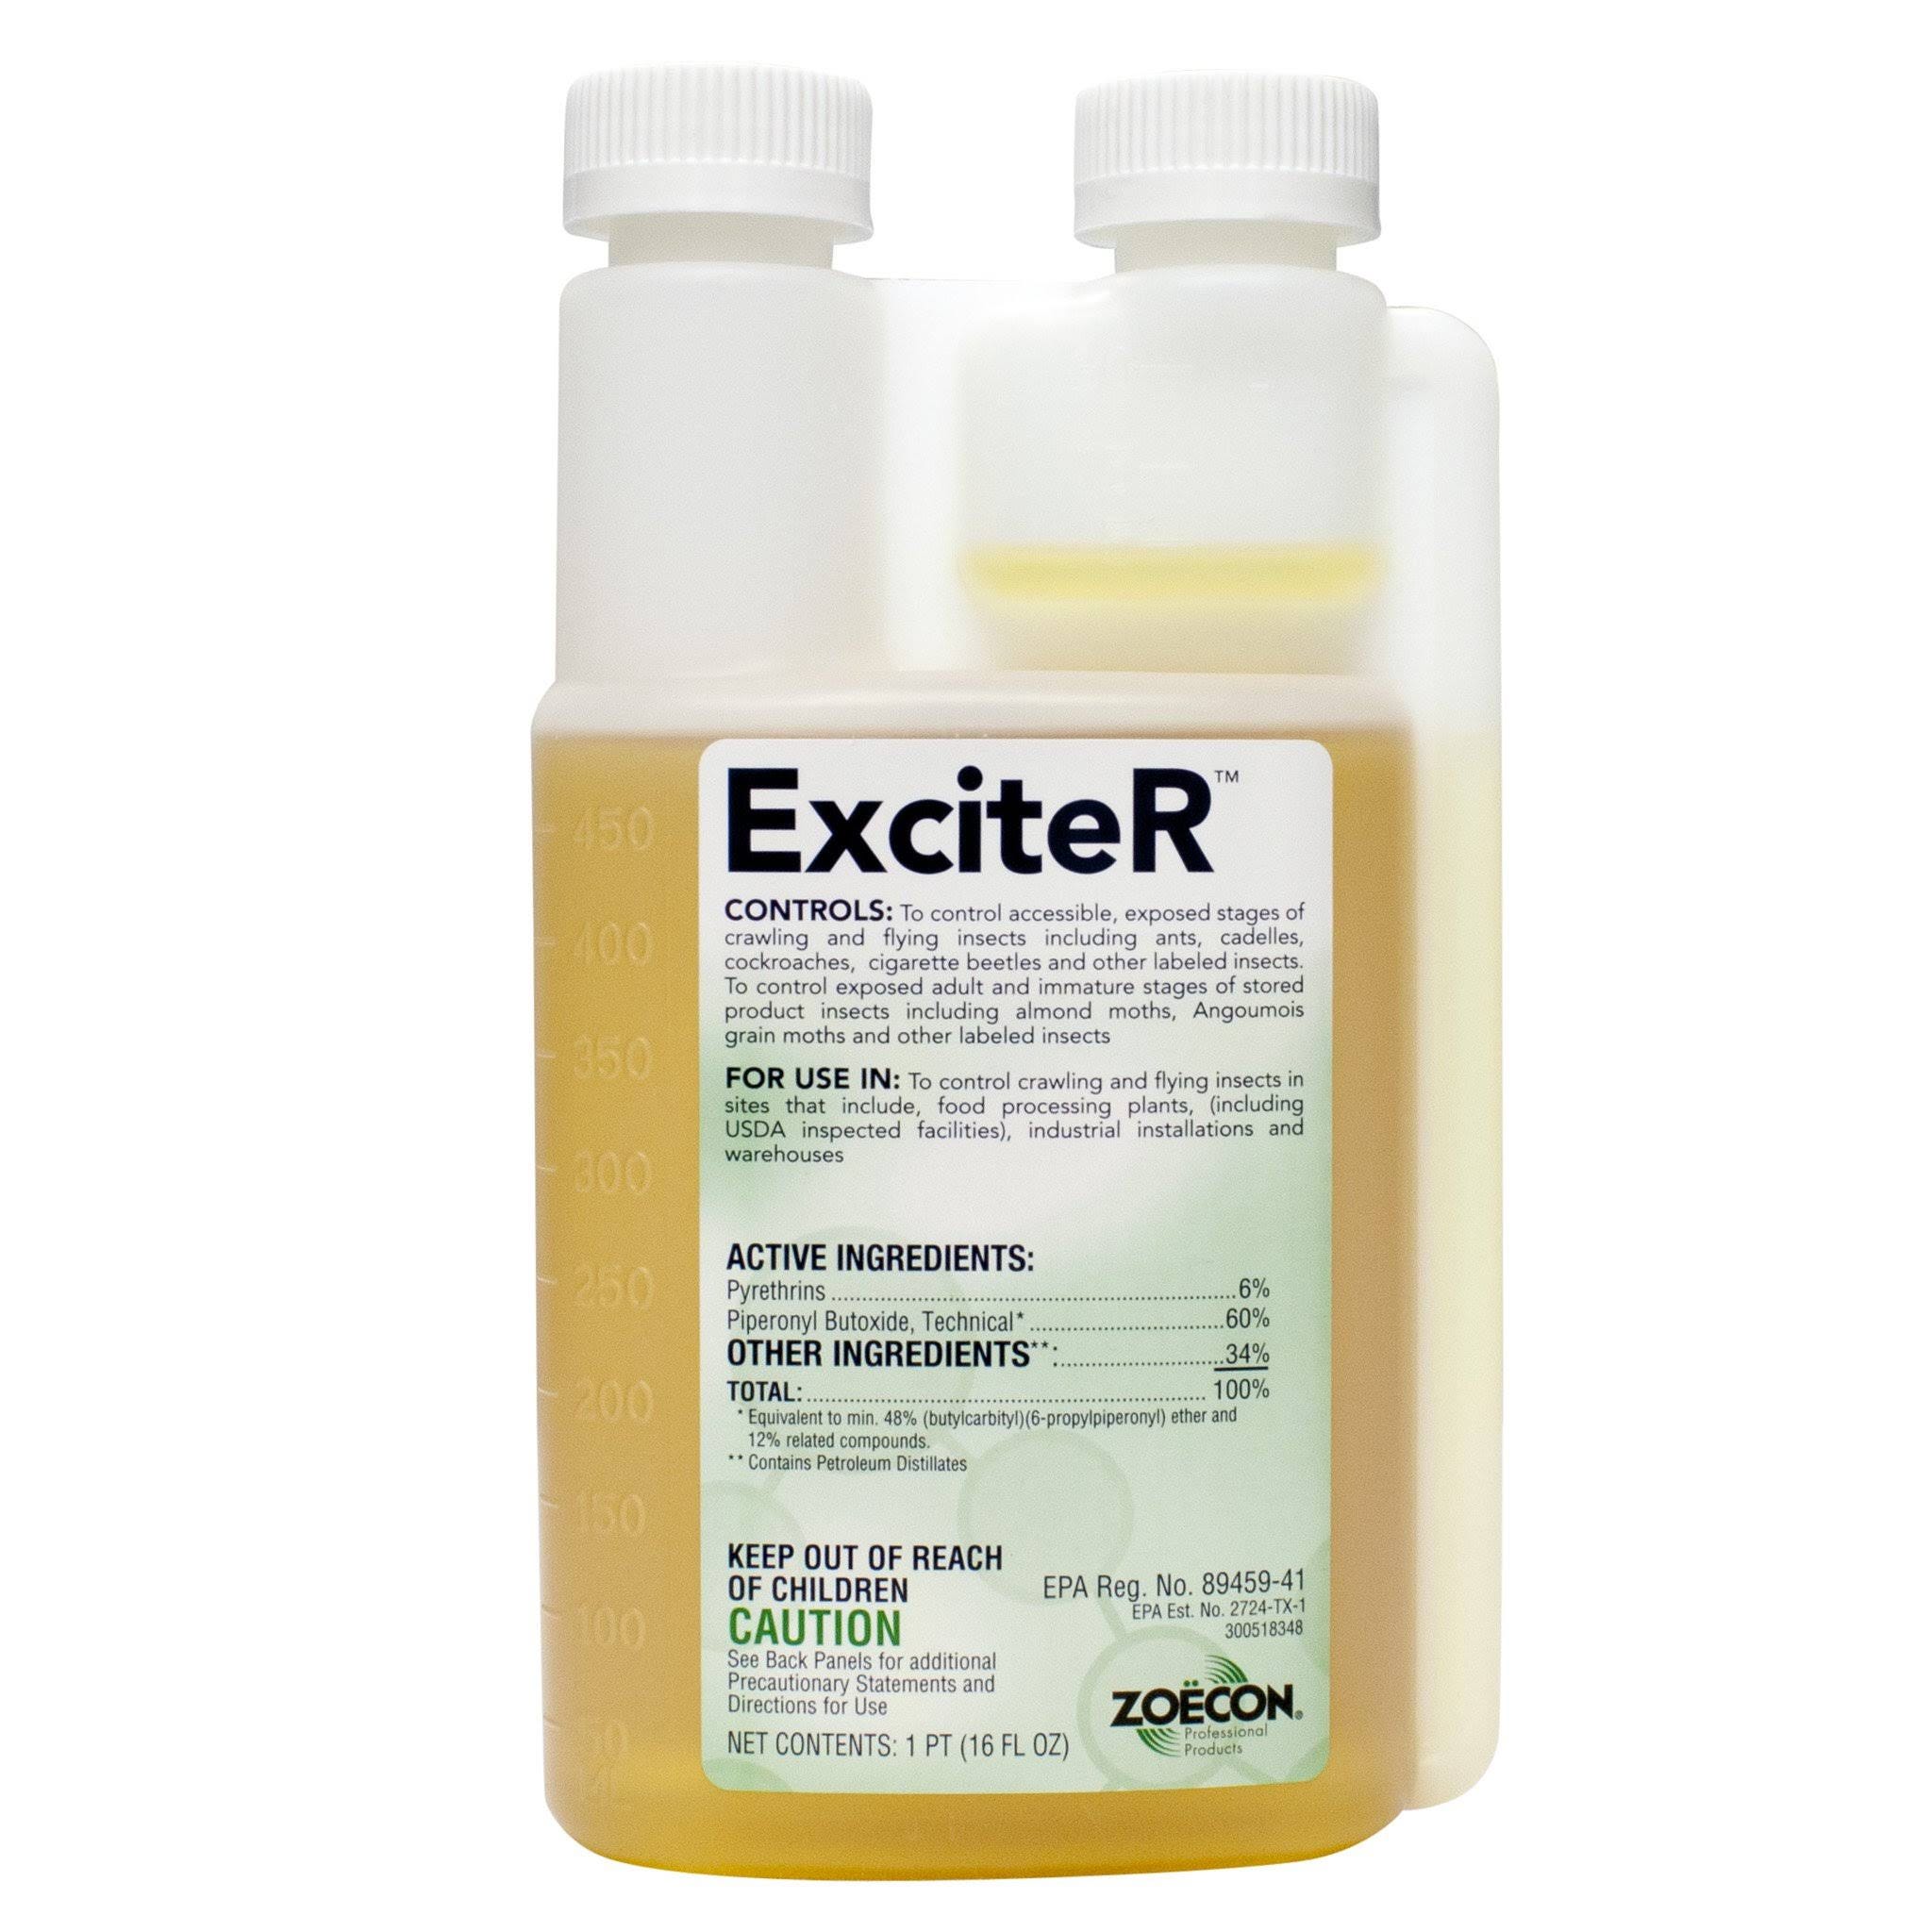 ExciteR Insecticide: High-Performance Bed Bug Spray for Indoor and Outdoor Use | Image